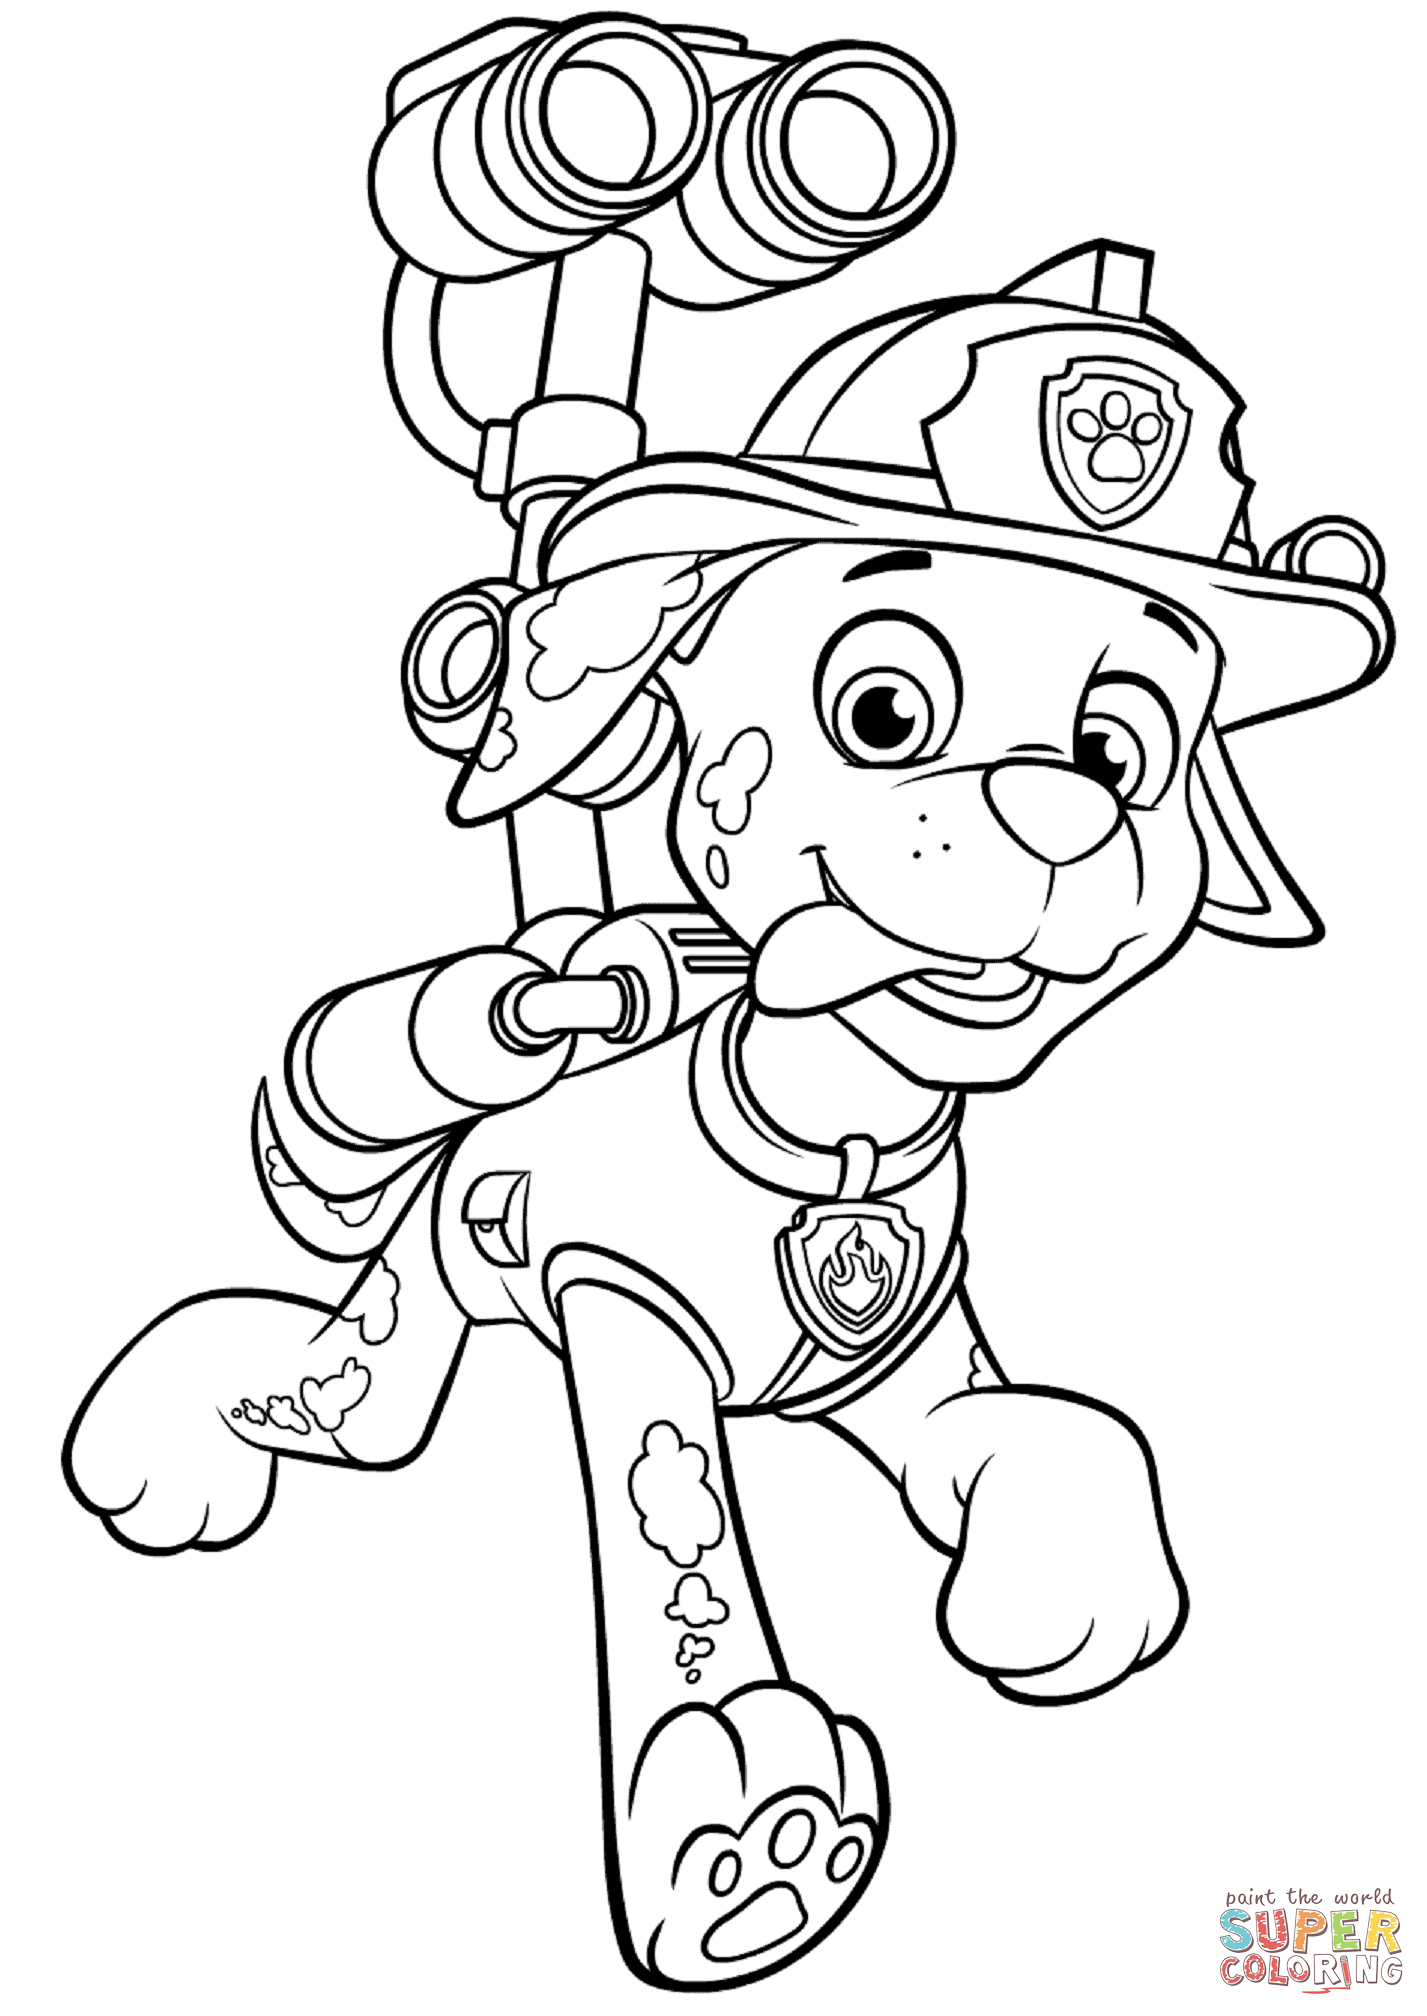 Paw Patrol Coloring Pages FREE Printable 97